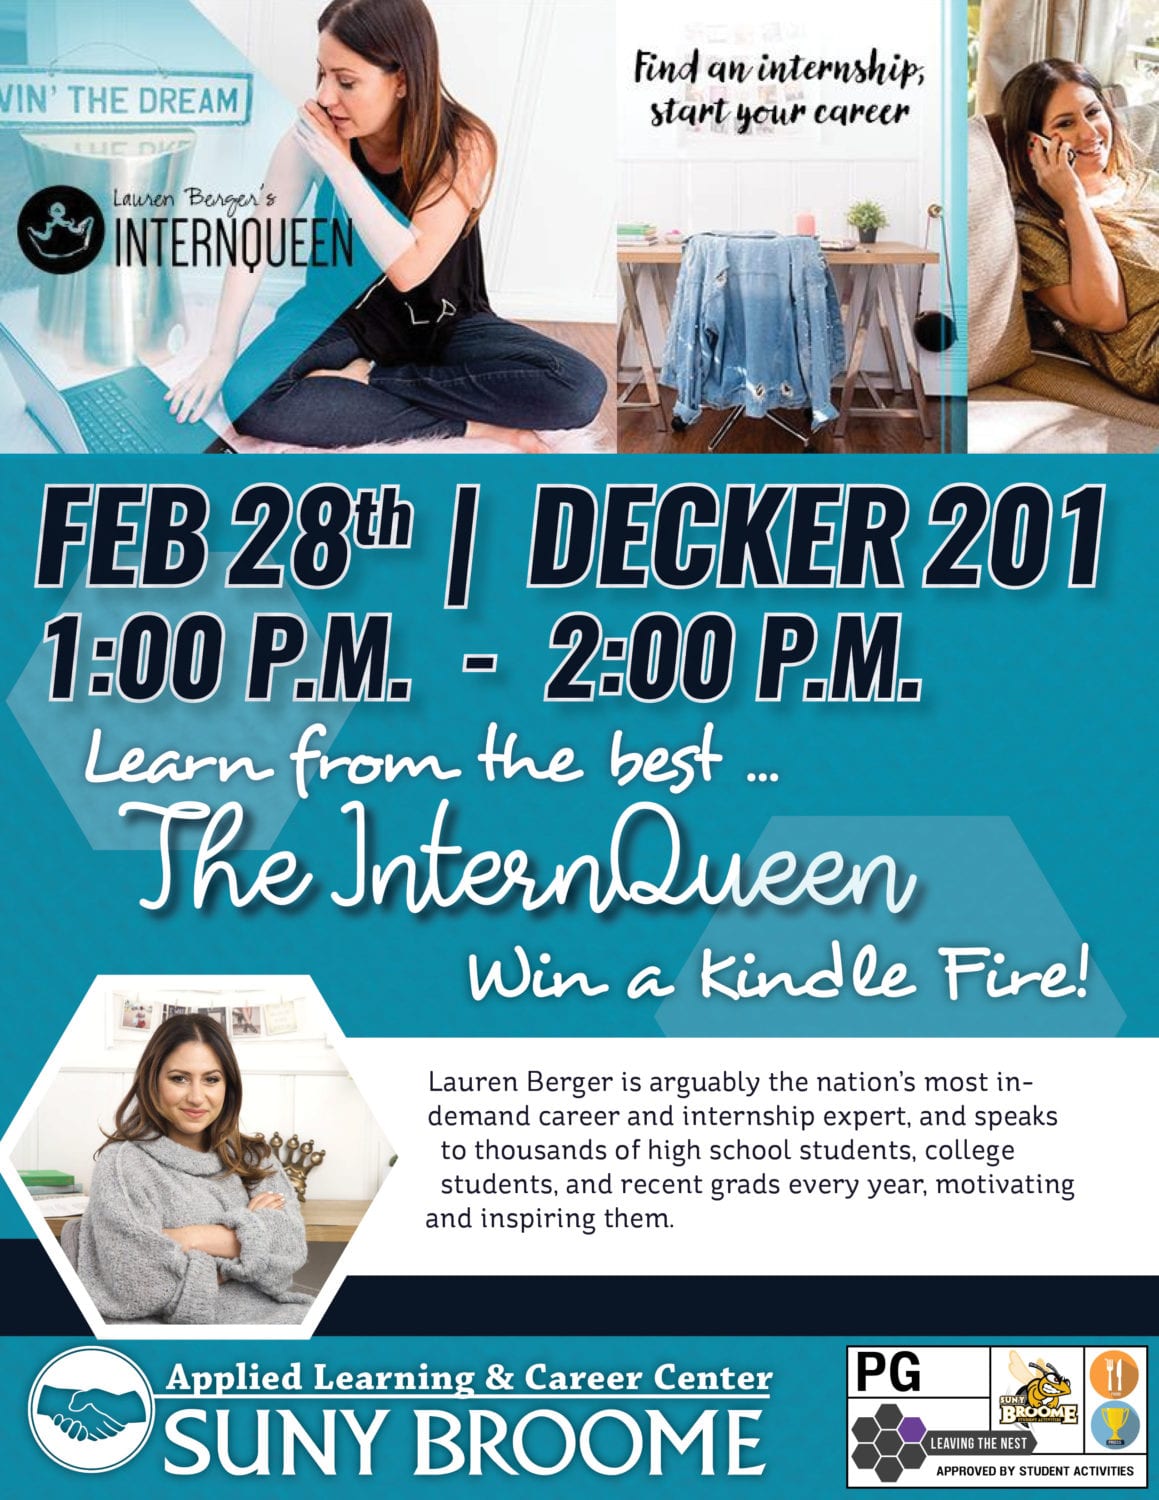 Meet and learn from the Intern Queen on Feb. 28